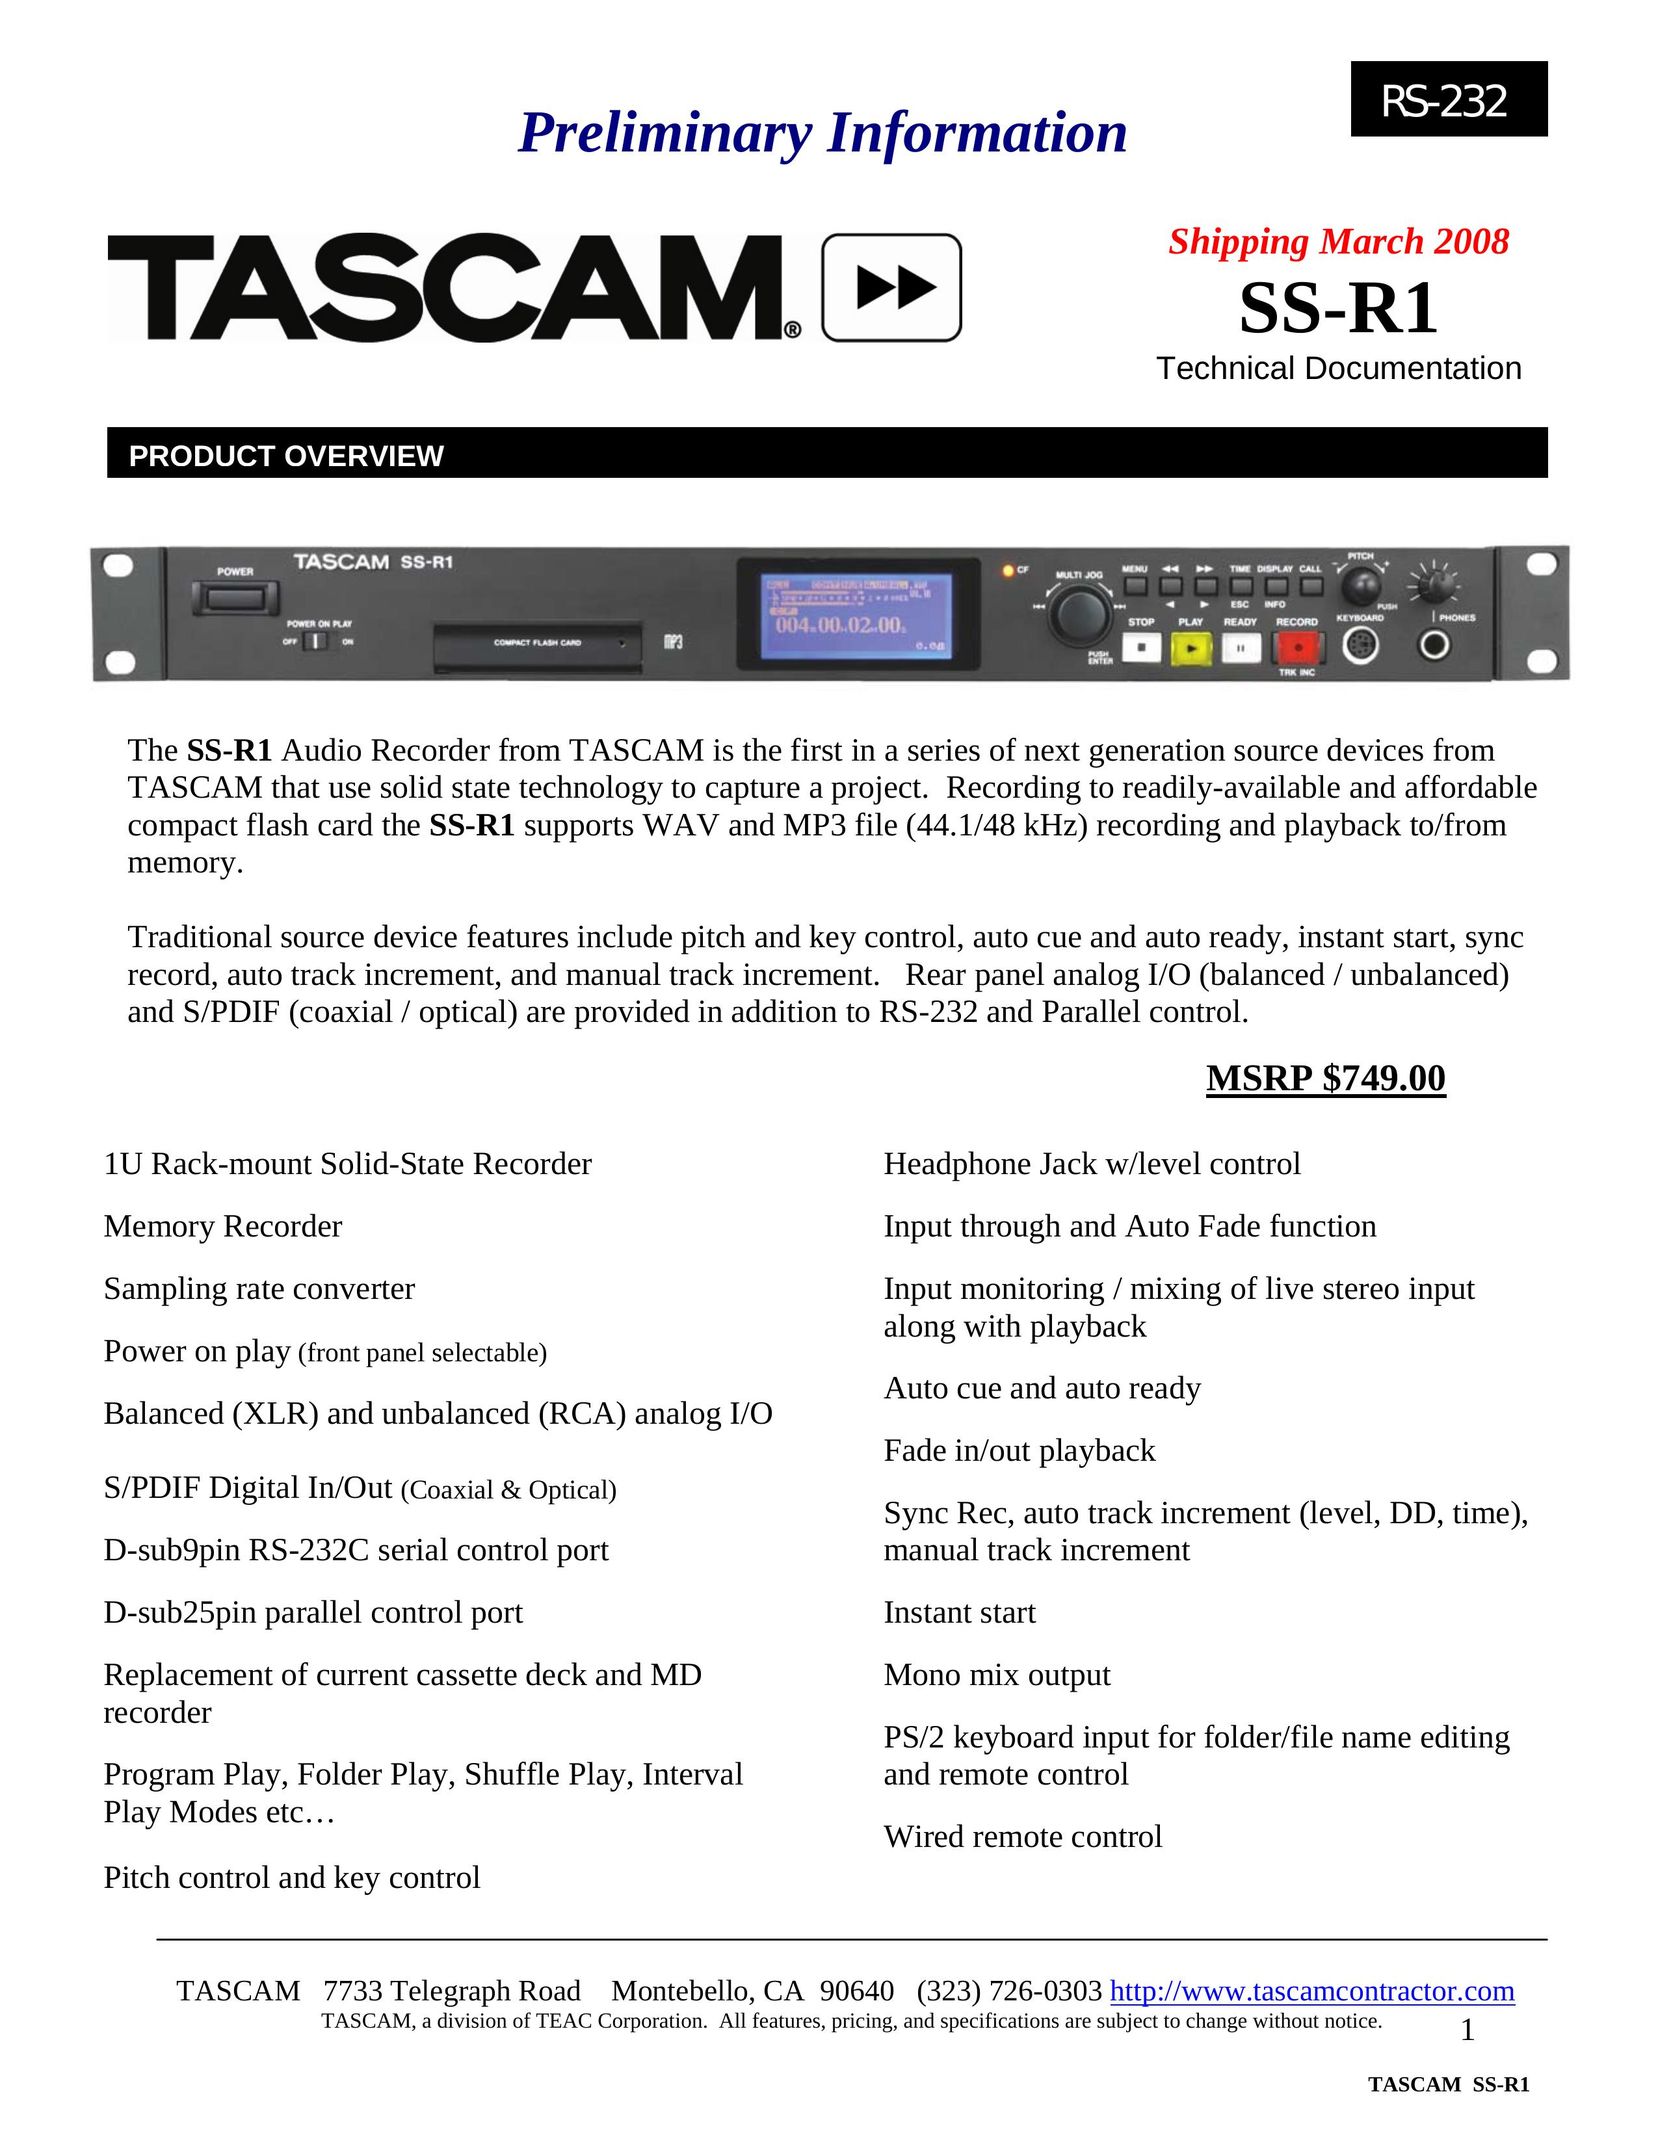 Tascam SS-R1 MP3 Player User Manual